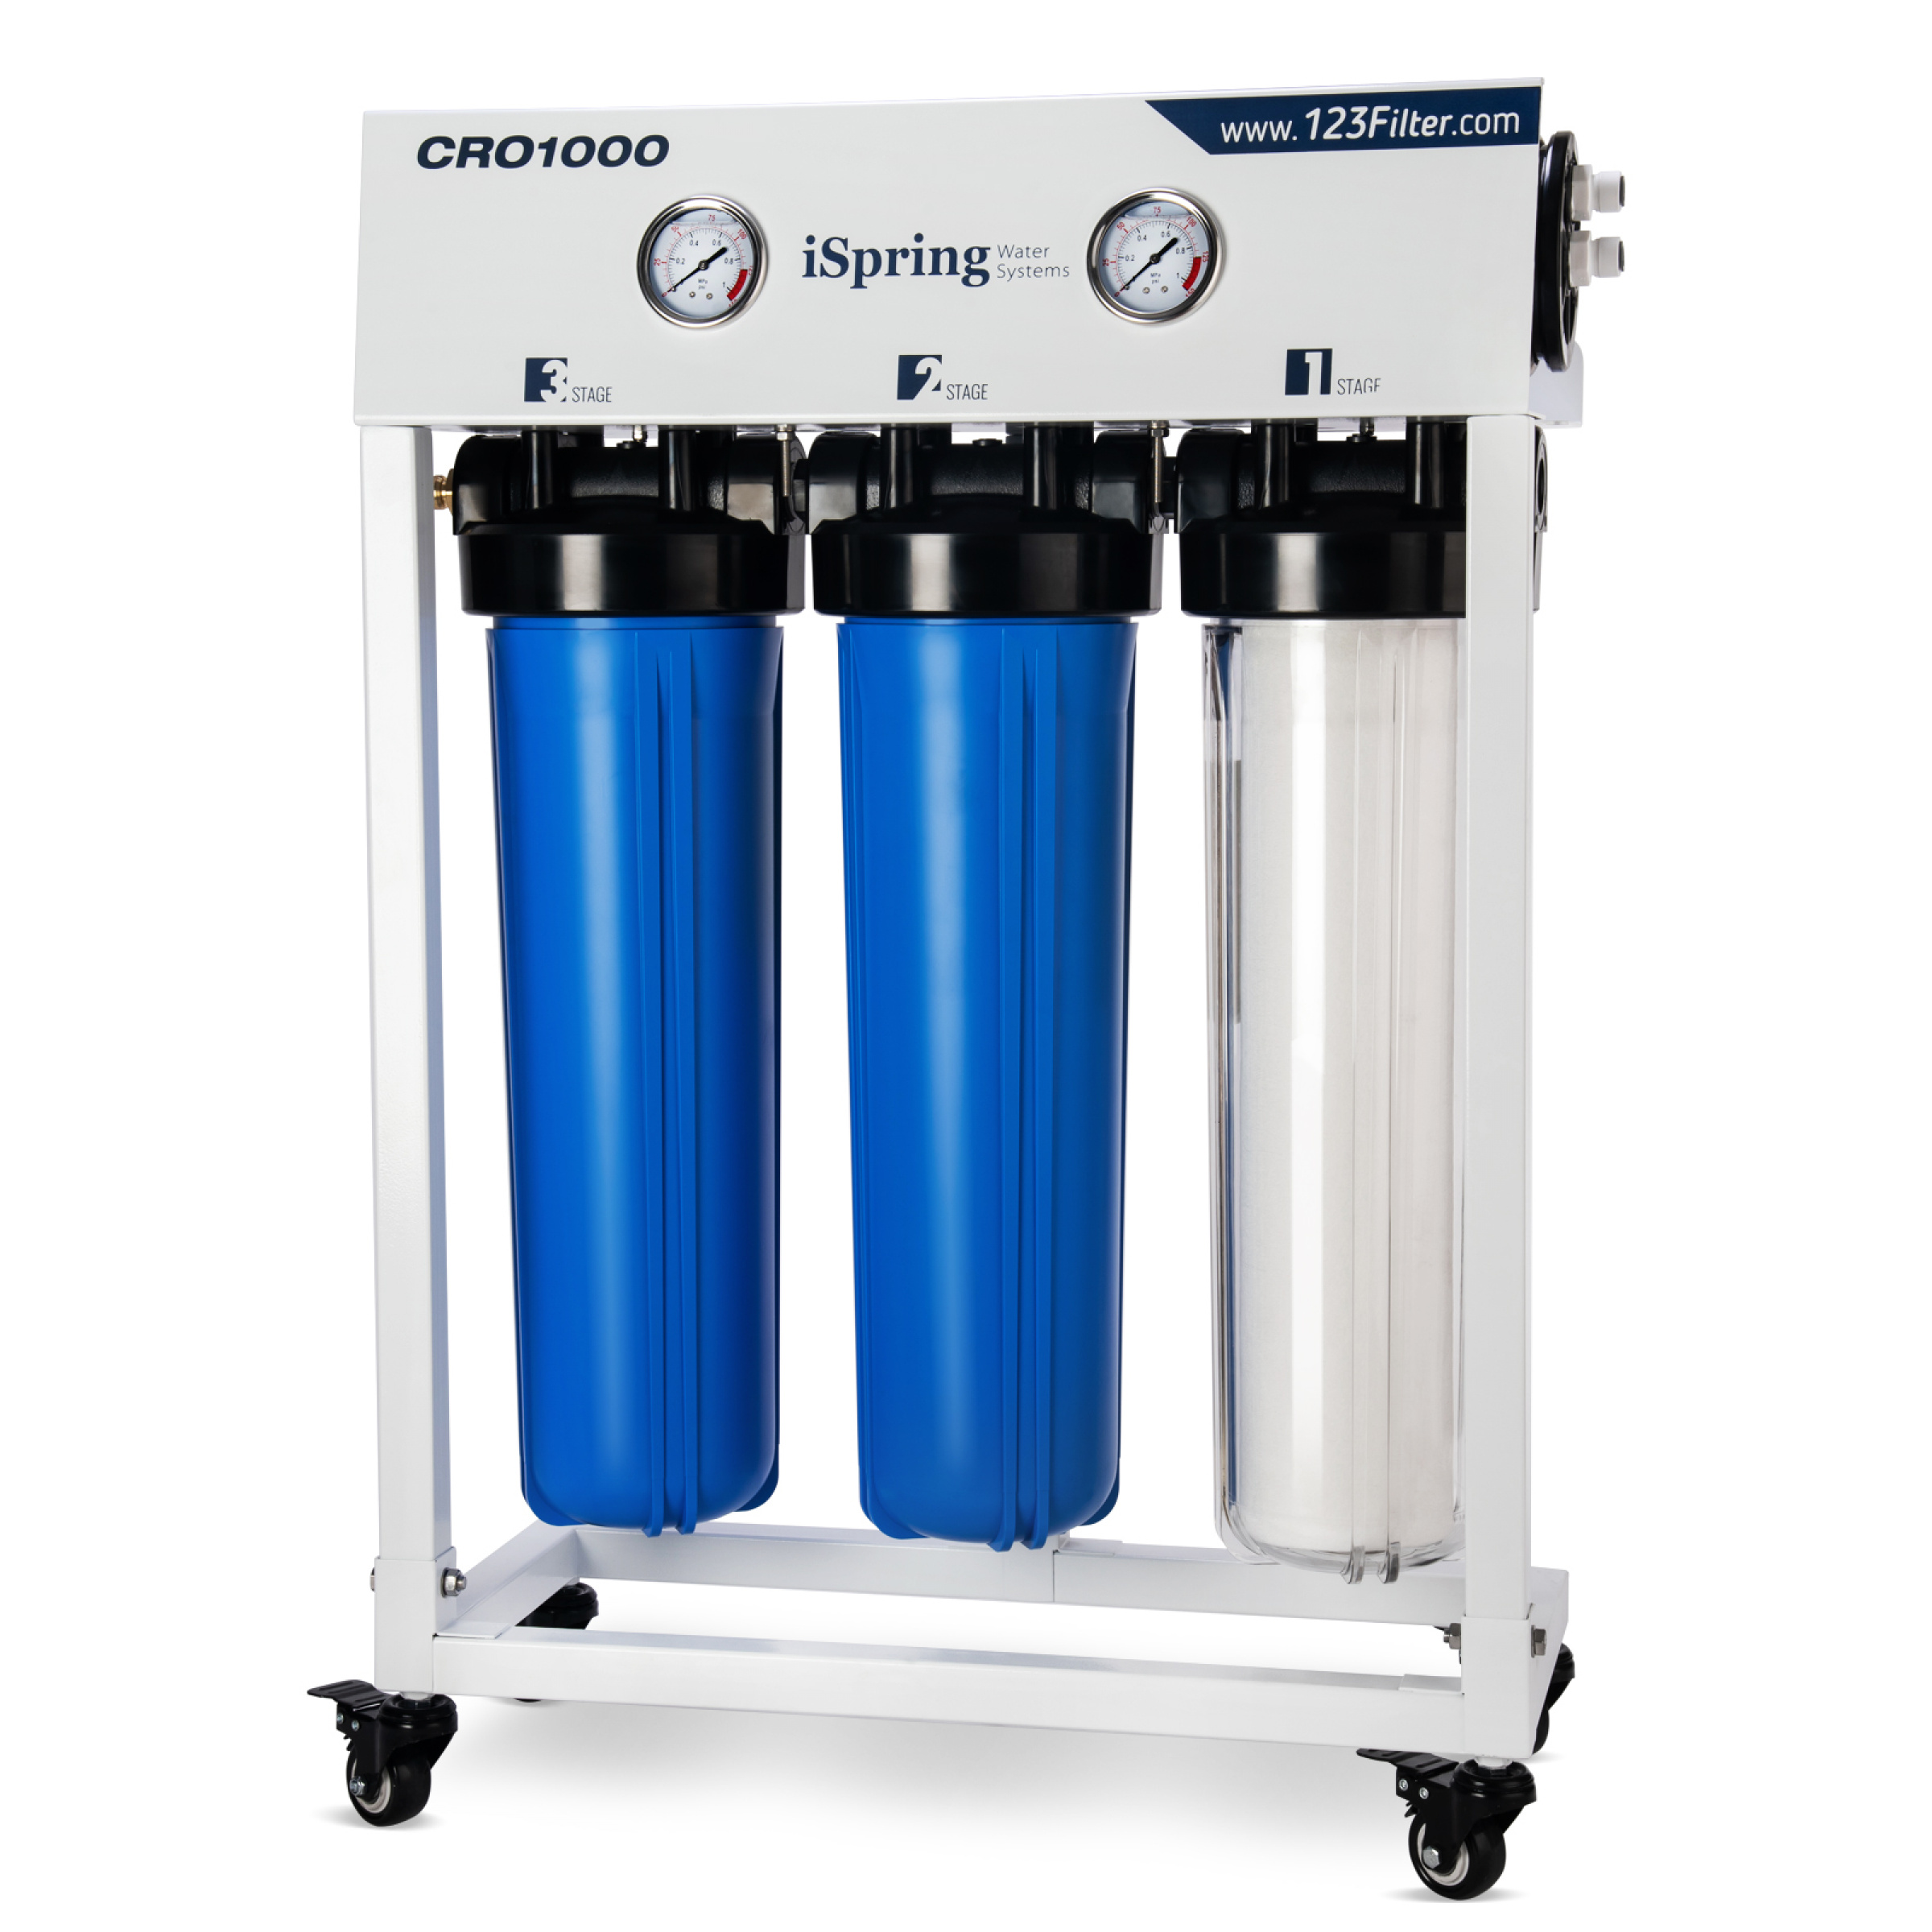 iSpring CRO1000 4Stage Tankless Commercial Reverse Osmosis Drinking Water Filtration System for